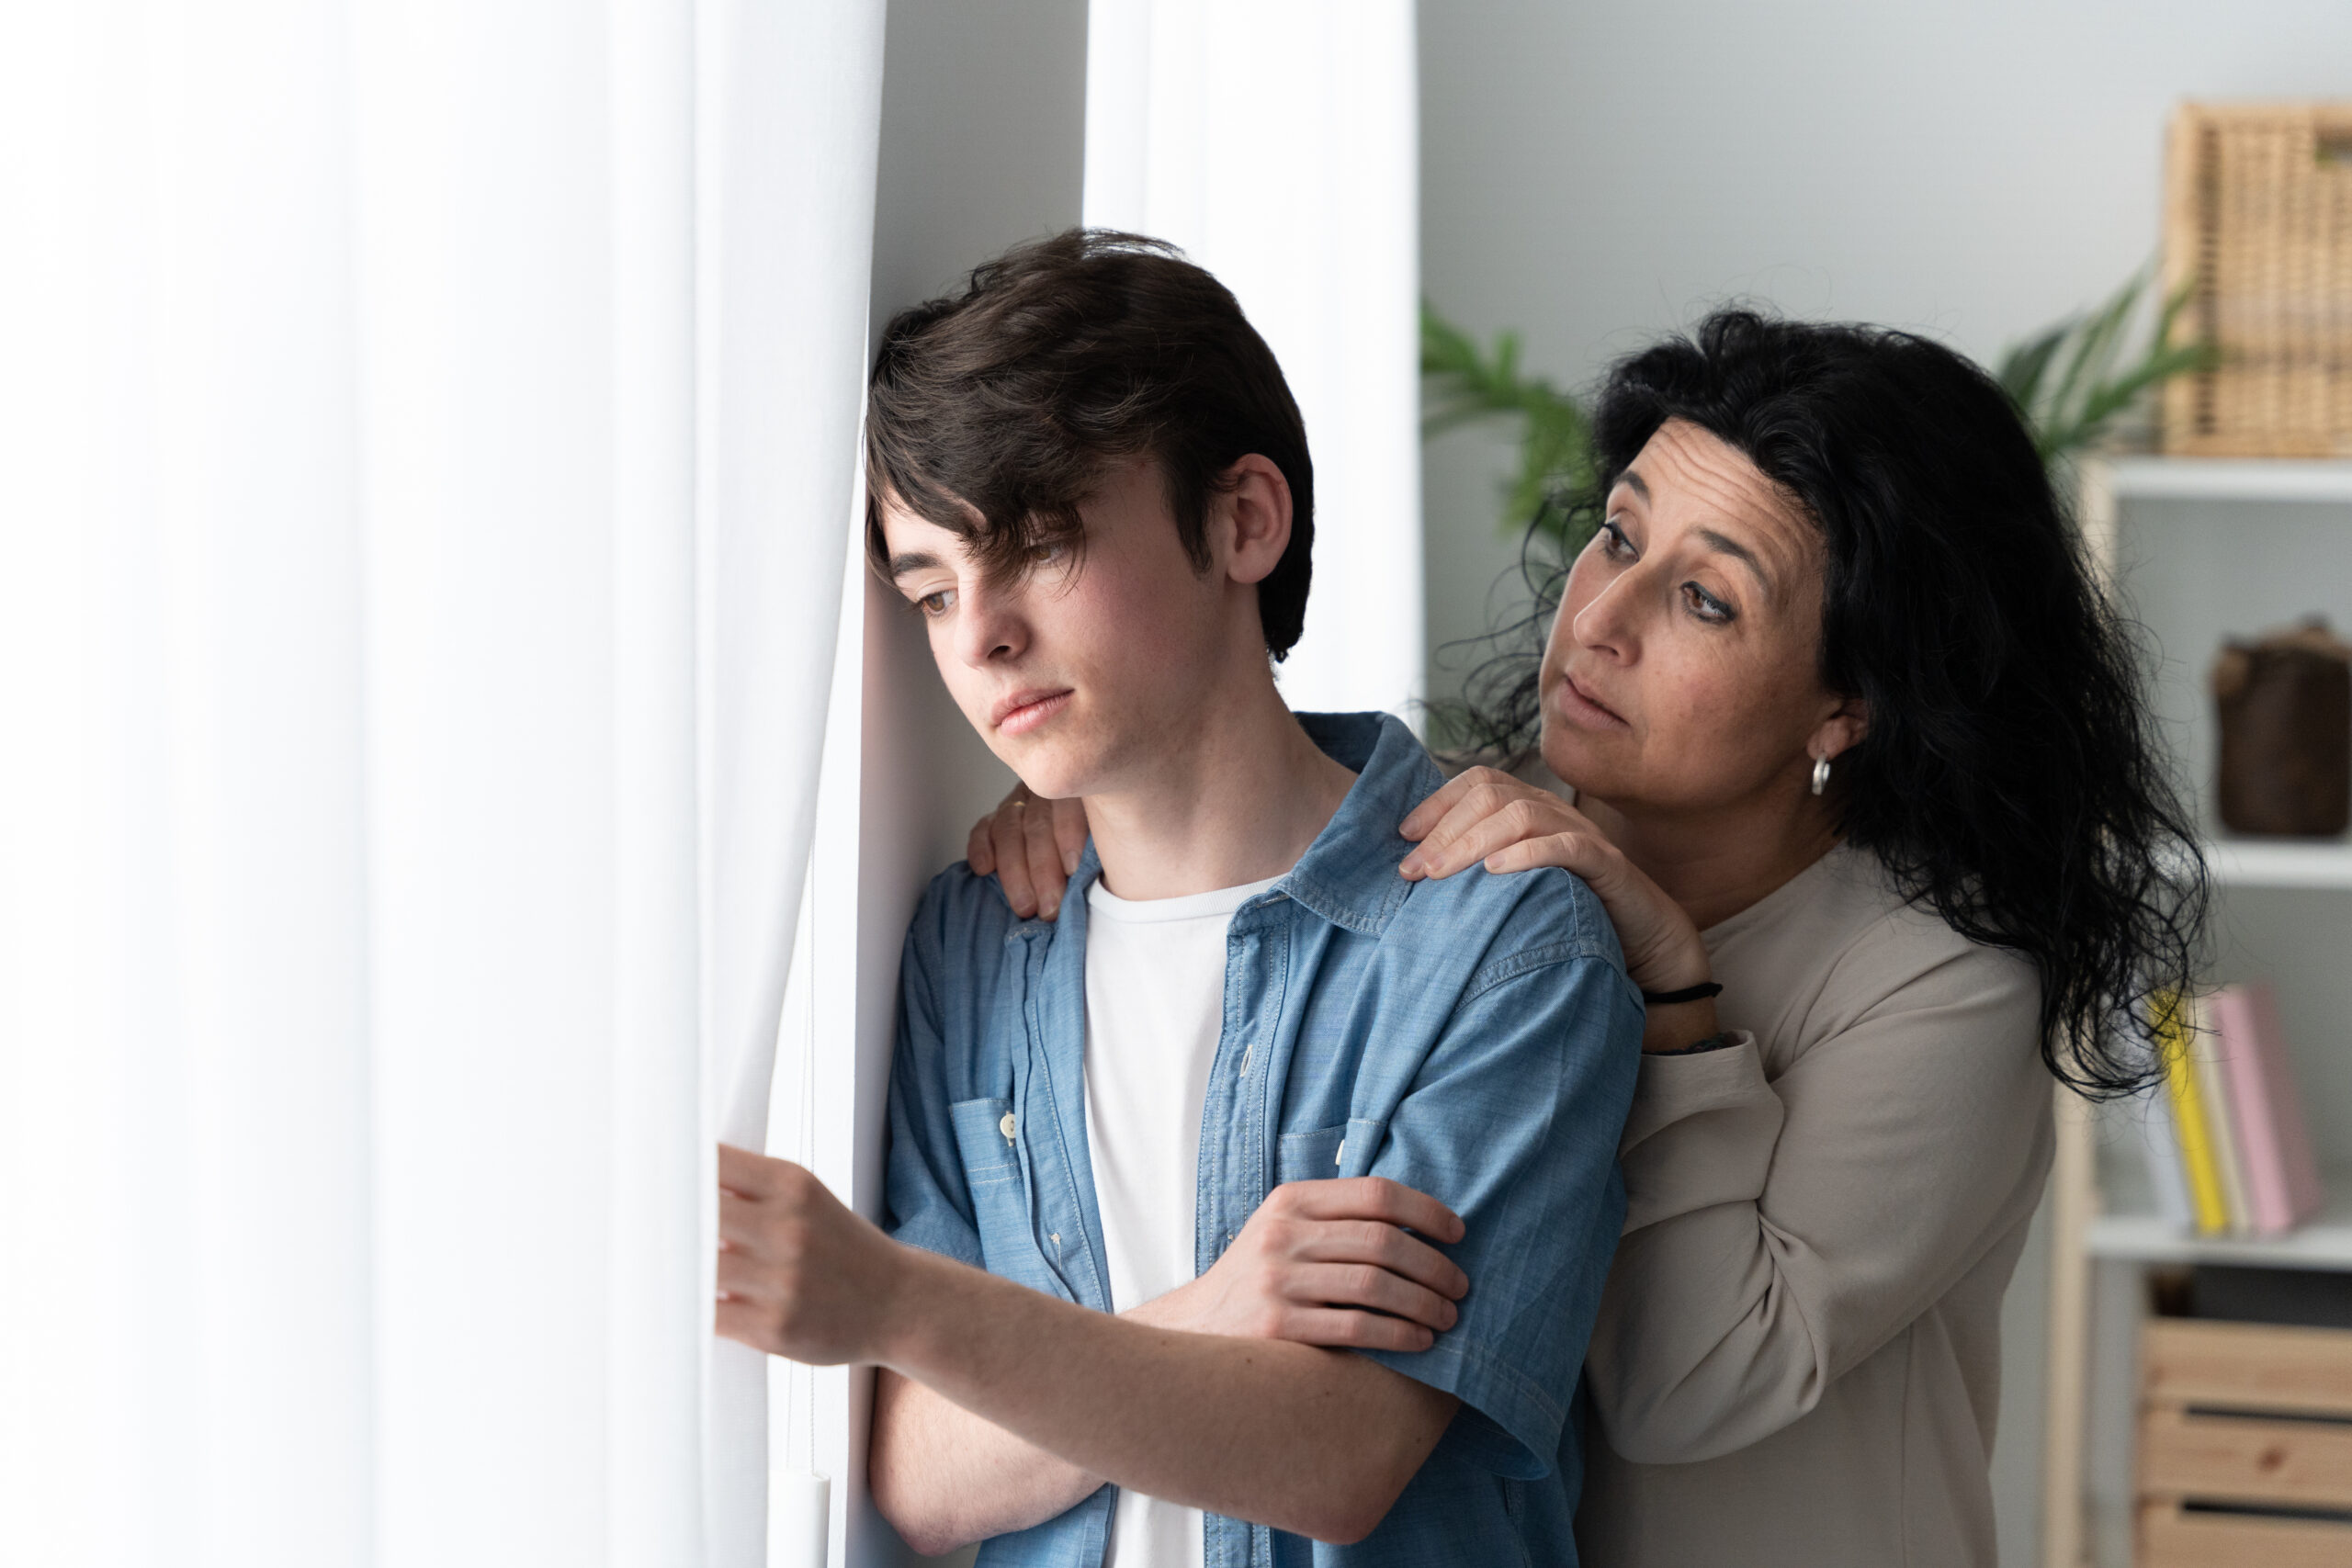 mother showing concern for son who is looking out the window. Signs of drug use in children, concept image.